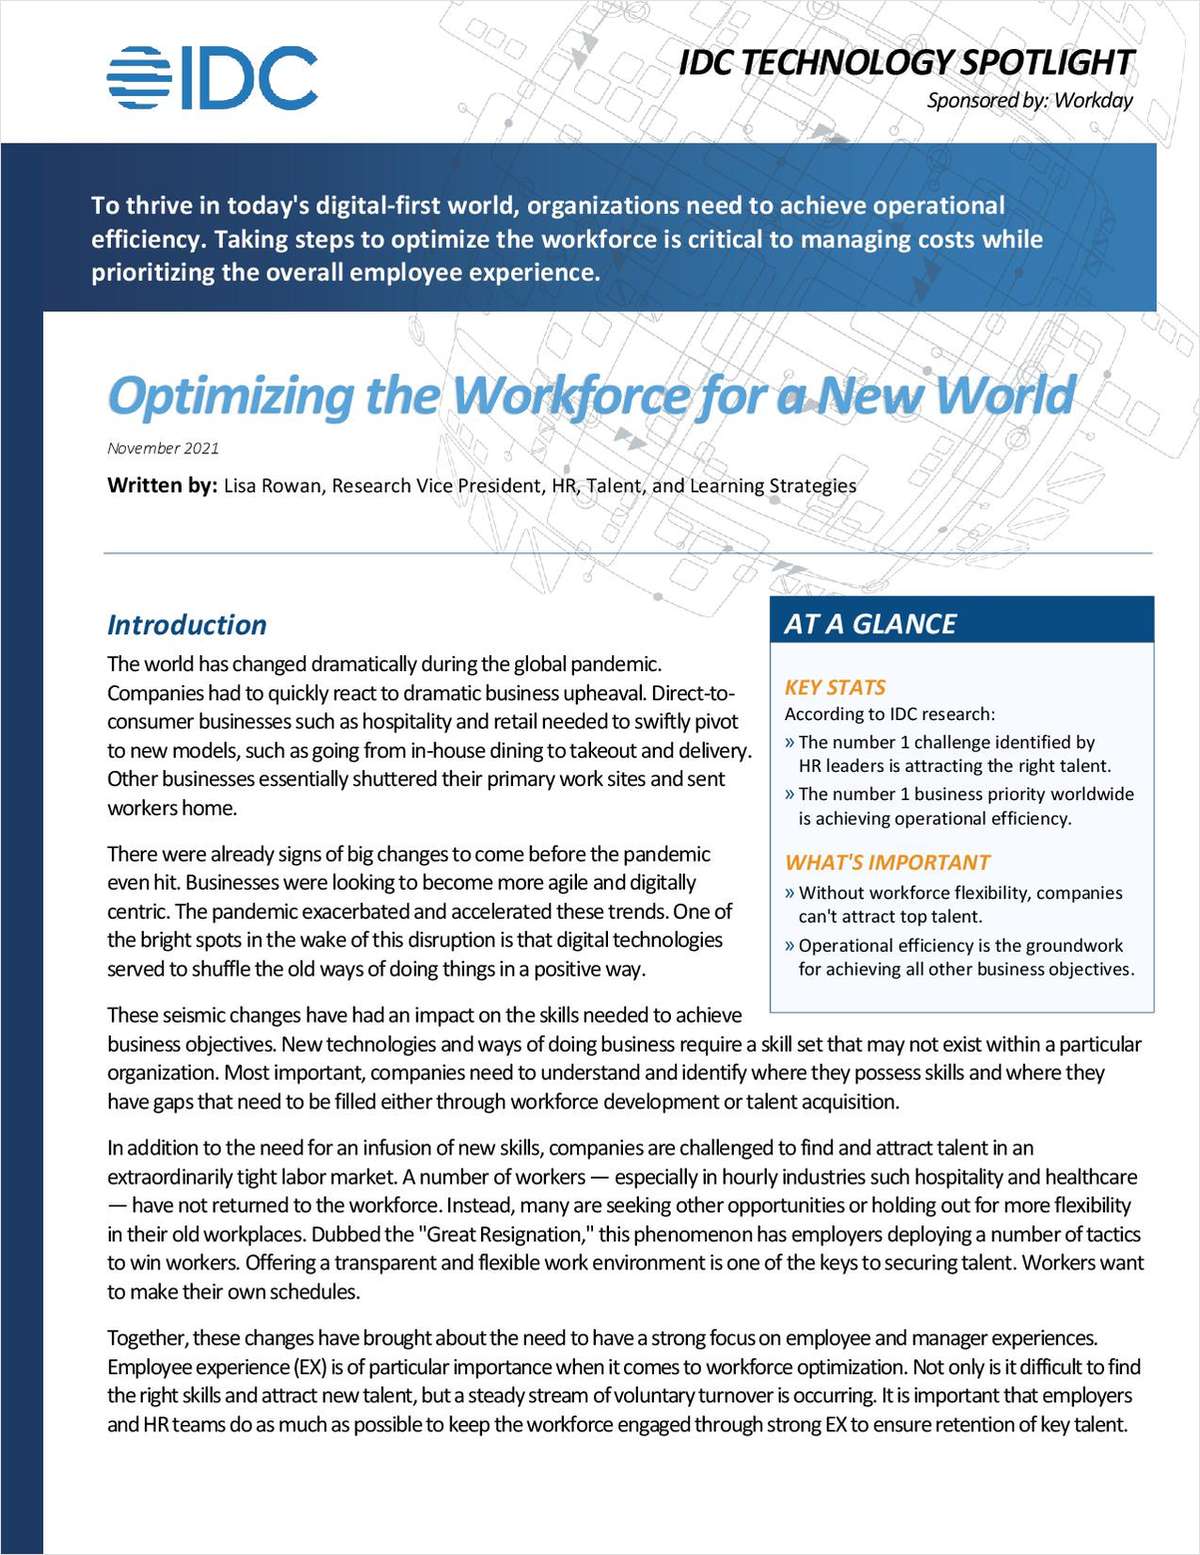 IDC Spotlight: Optimizing the Workforce for a New World